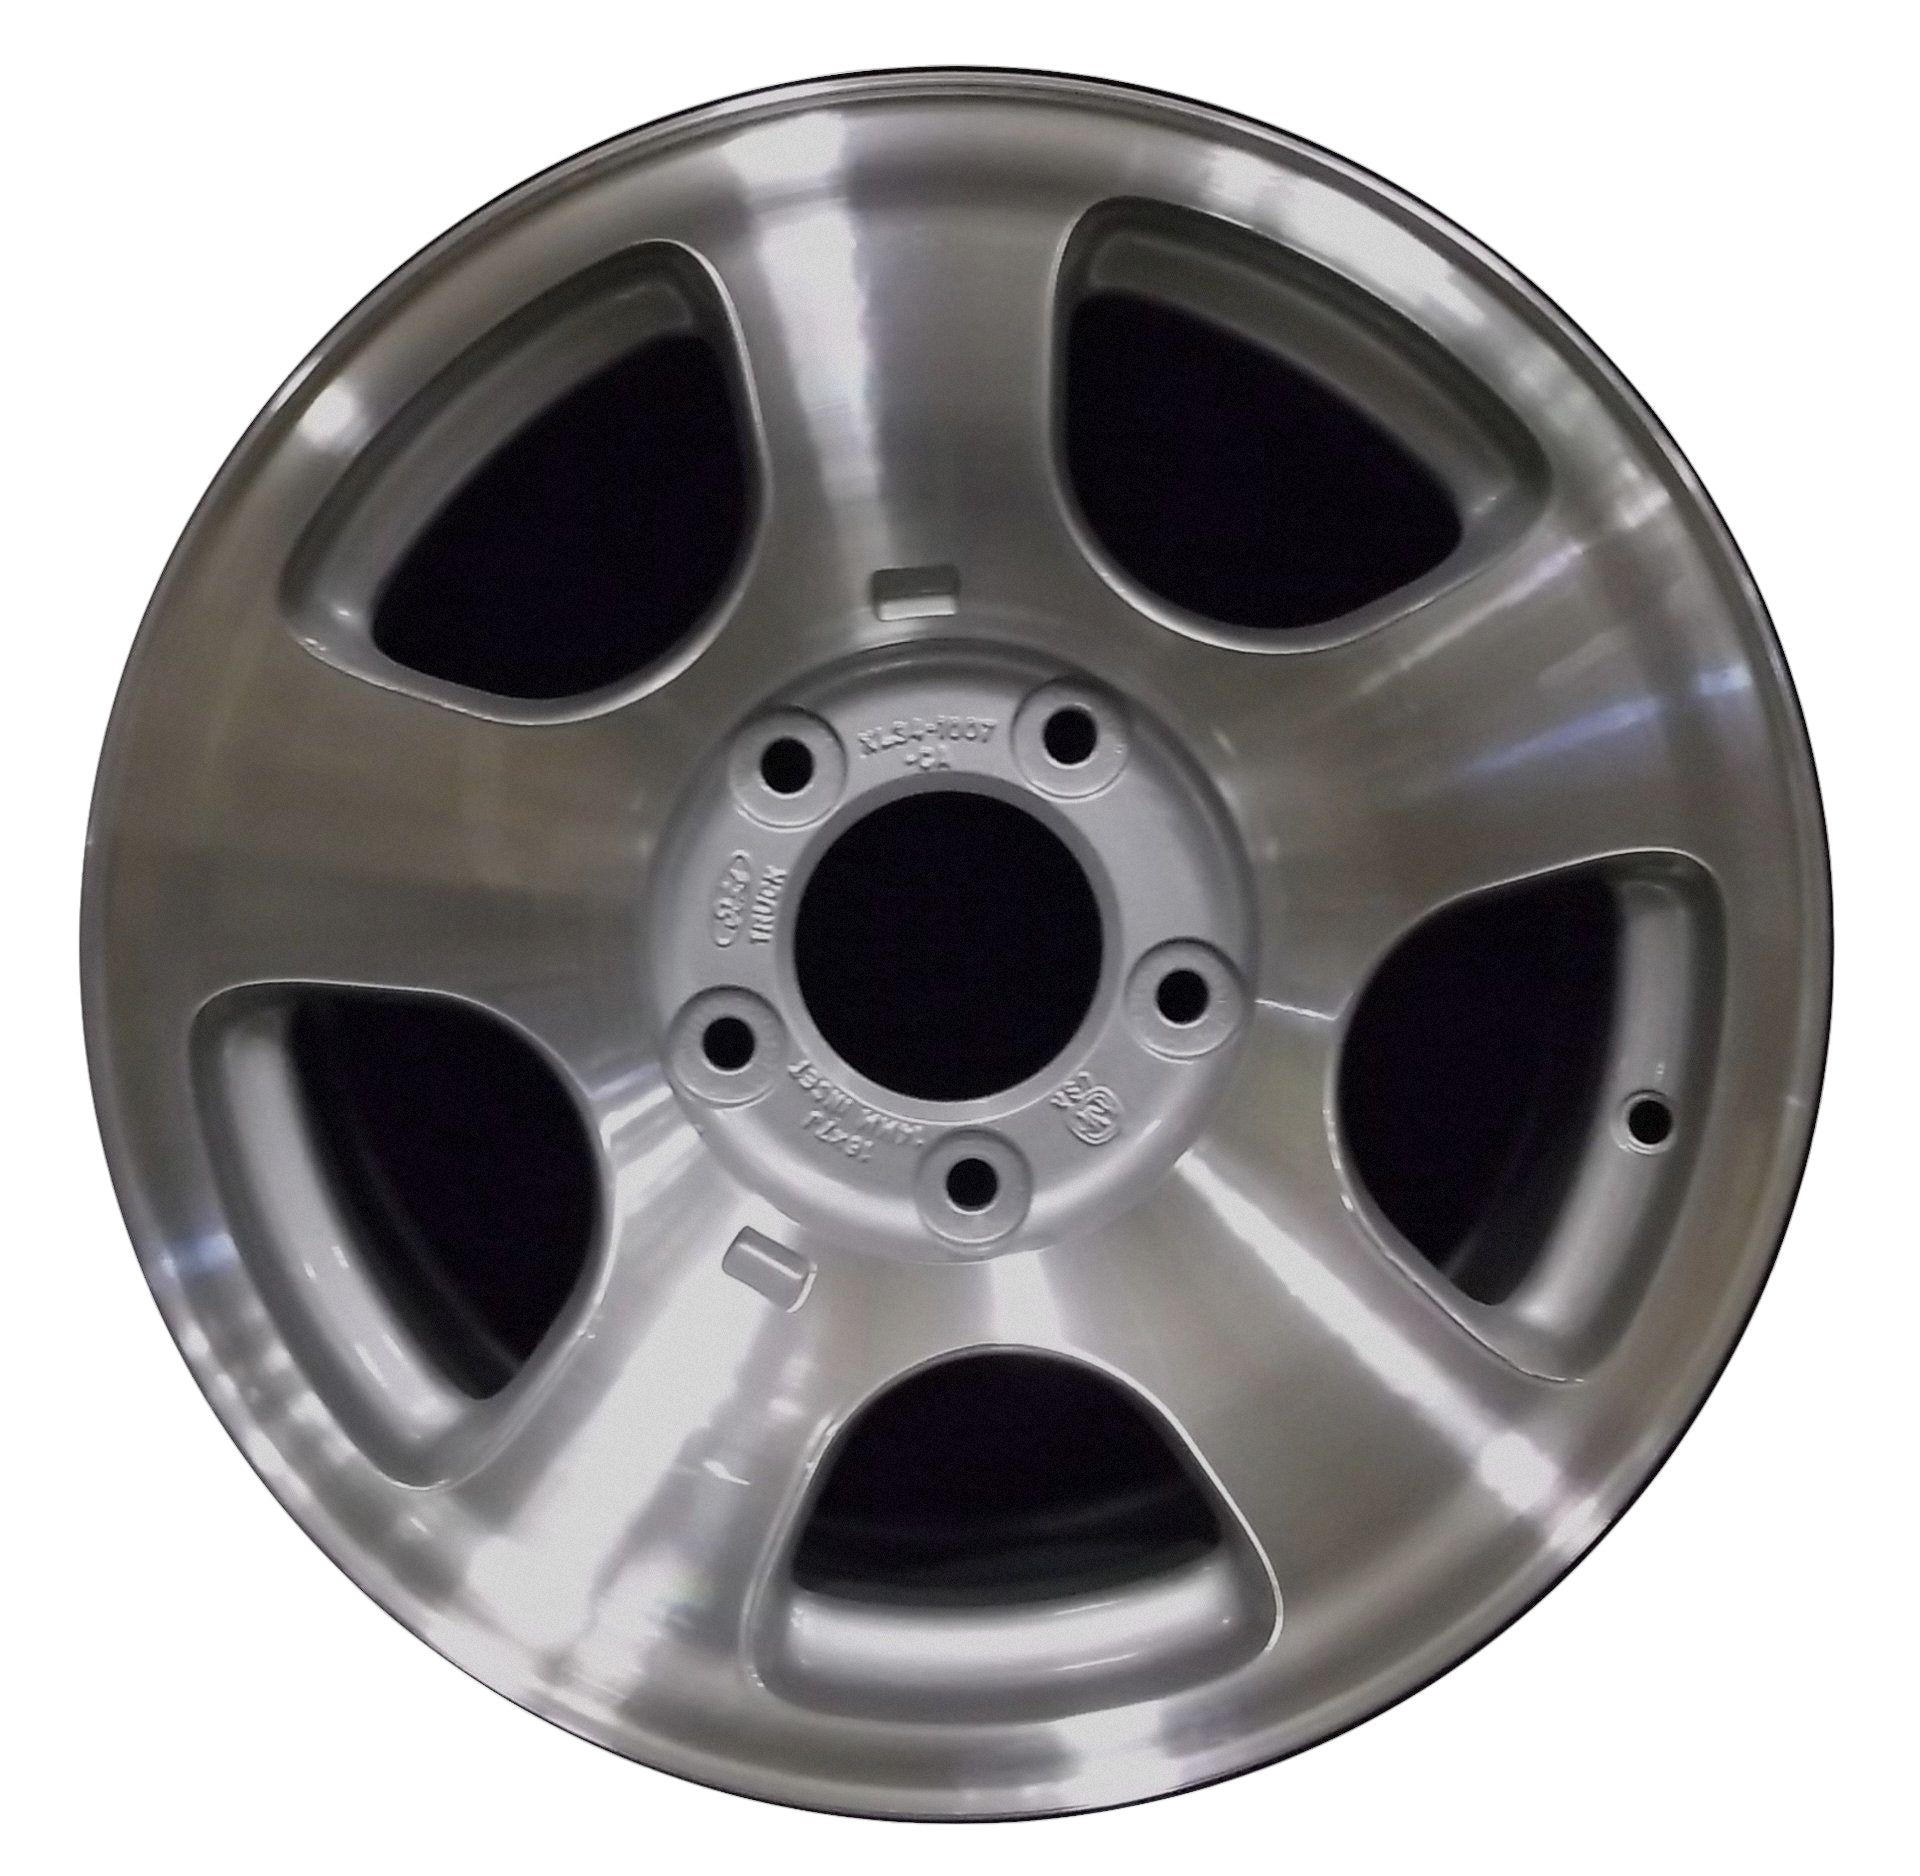 Ford F150 Truck  1999, 2000, 2001 Factory OEM Car Wheel Size 16x7 Alloy WAO.3347.PS02.MA